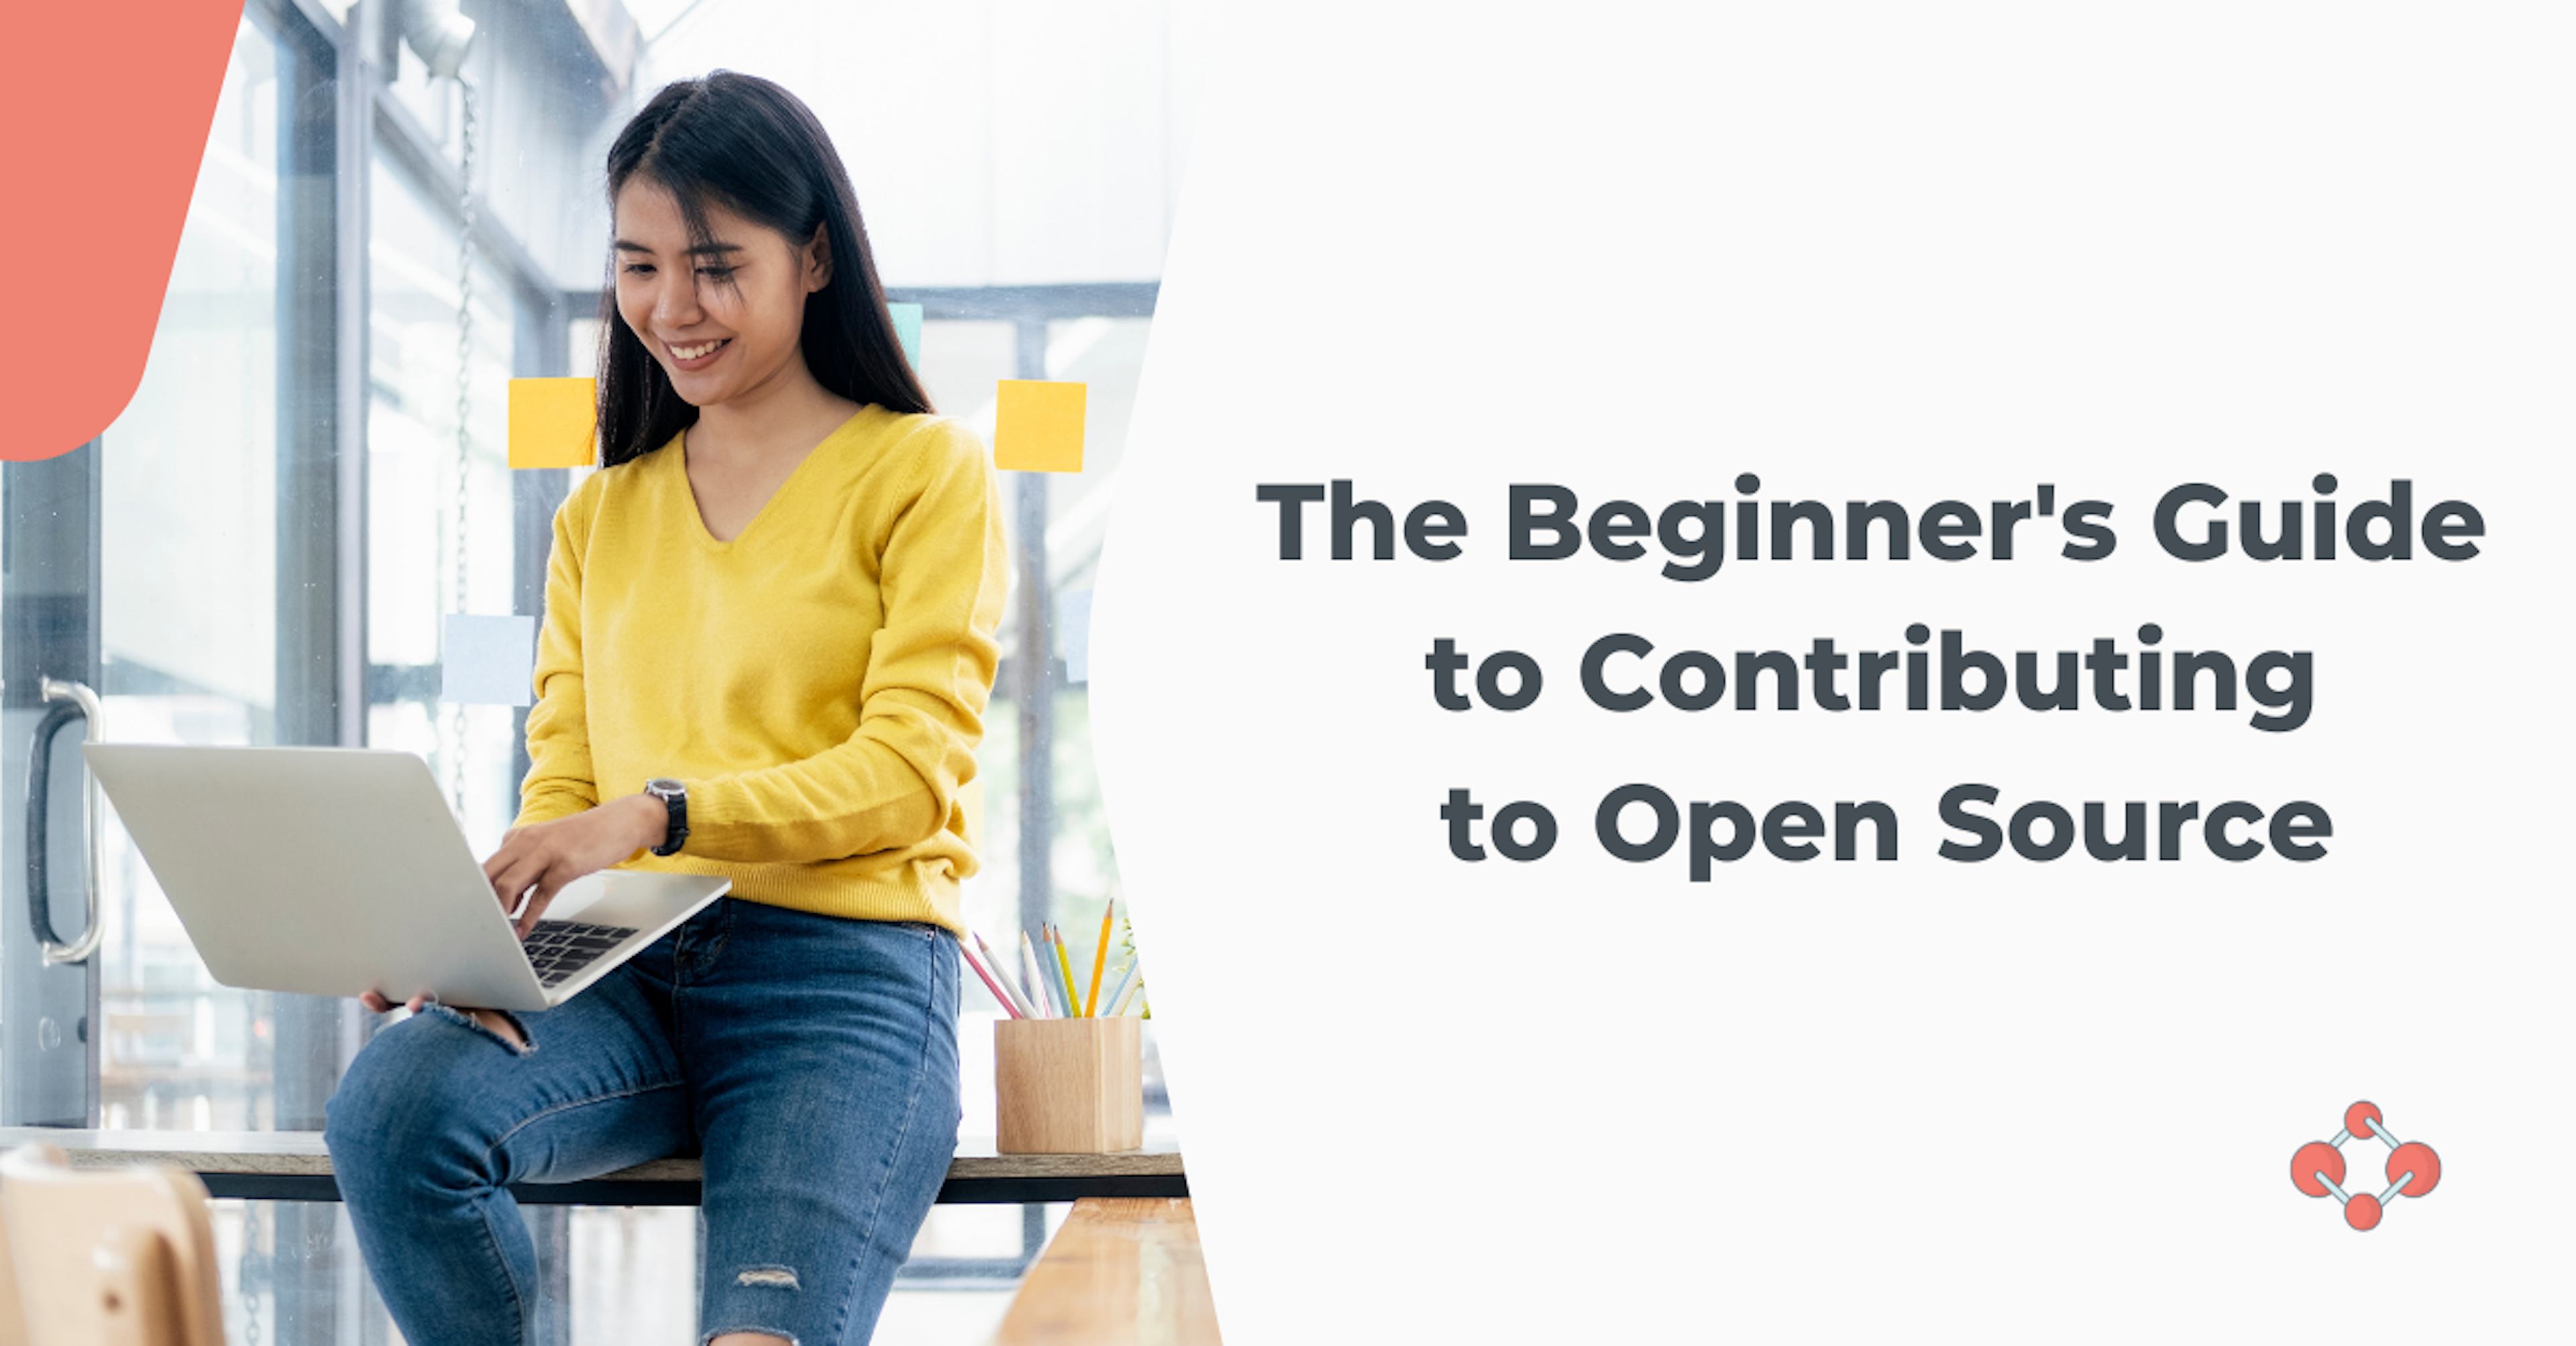 The Beginner's Guide to Contributing to Open Source